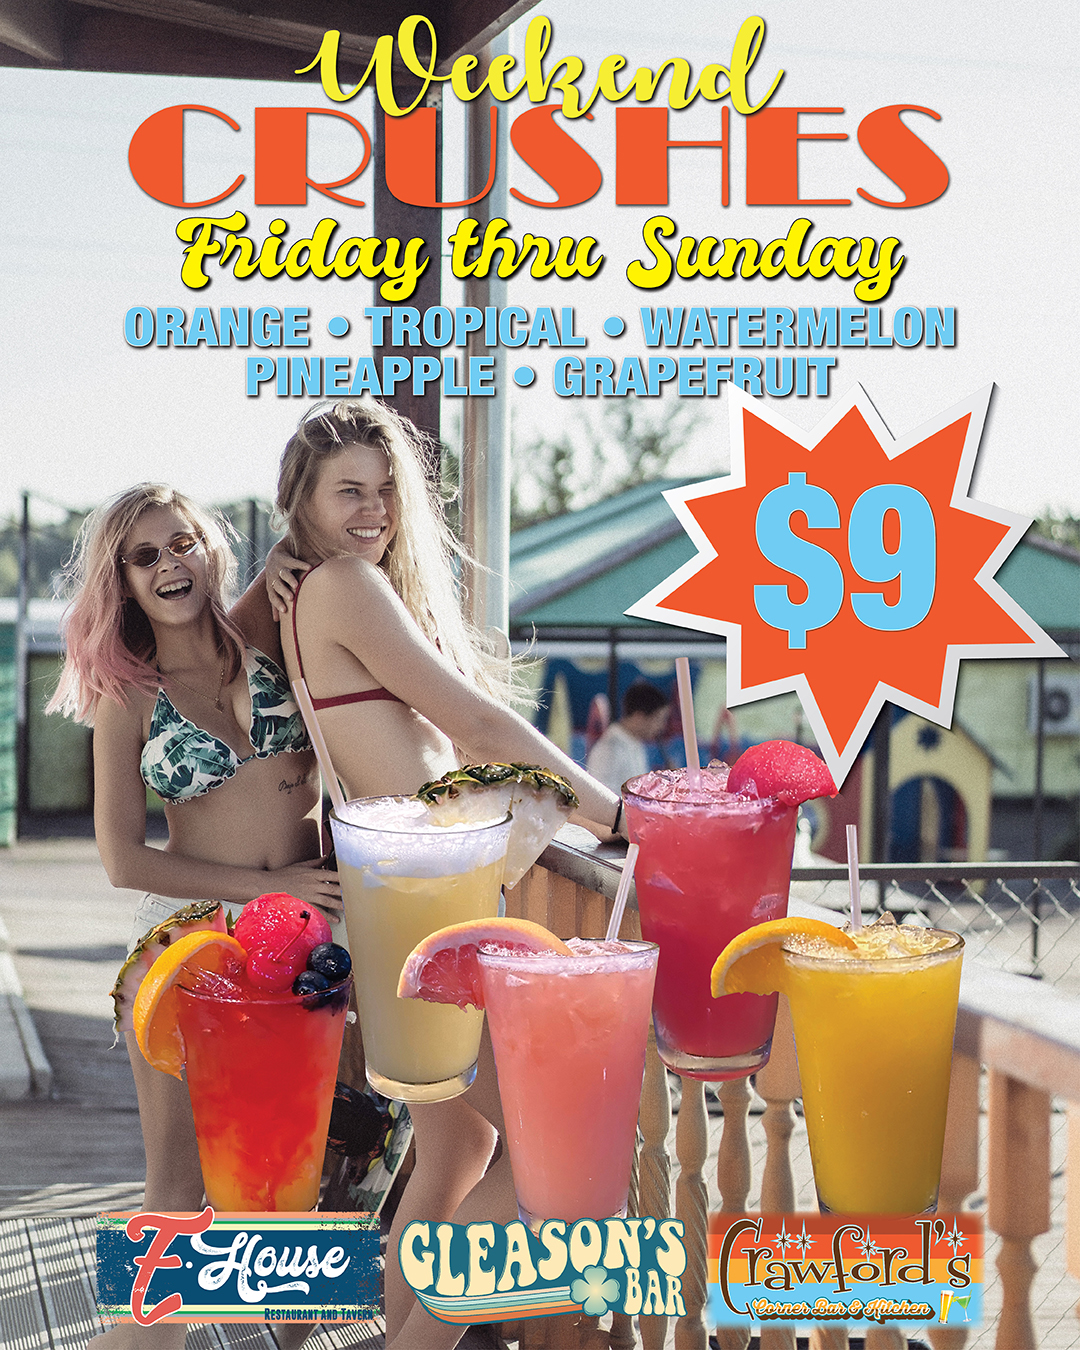 Promotional flyer for weekend slushes at a bar, featuring two joyful women carrying large colorful slush drinks, with text detailing flavors and price.